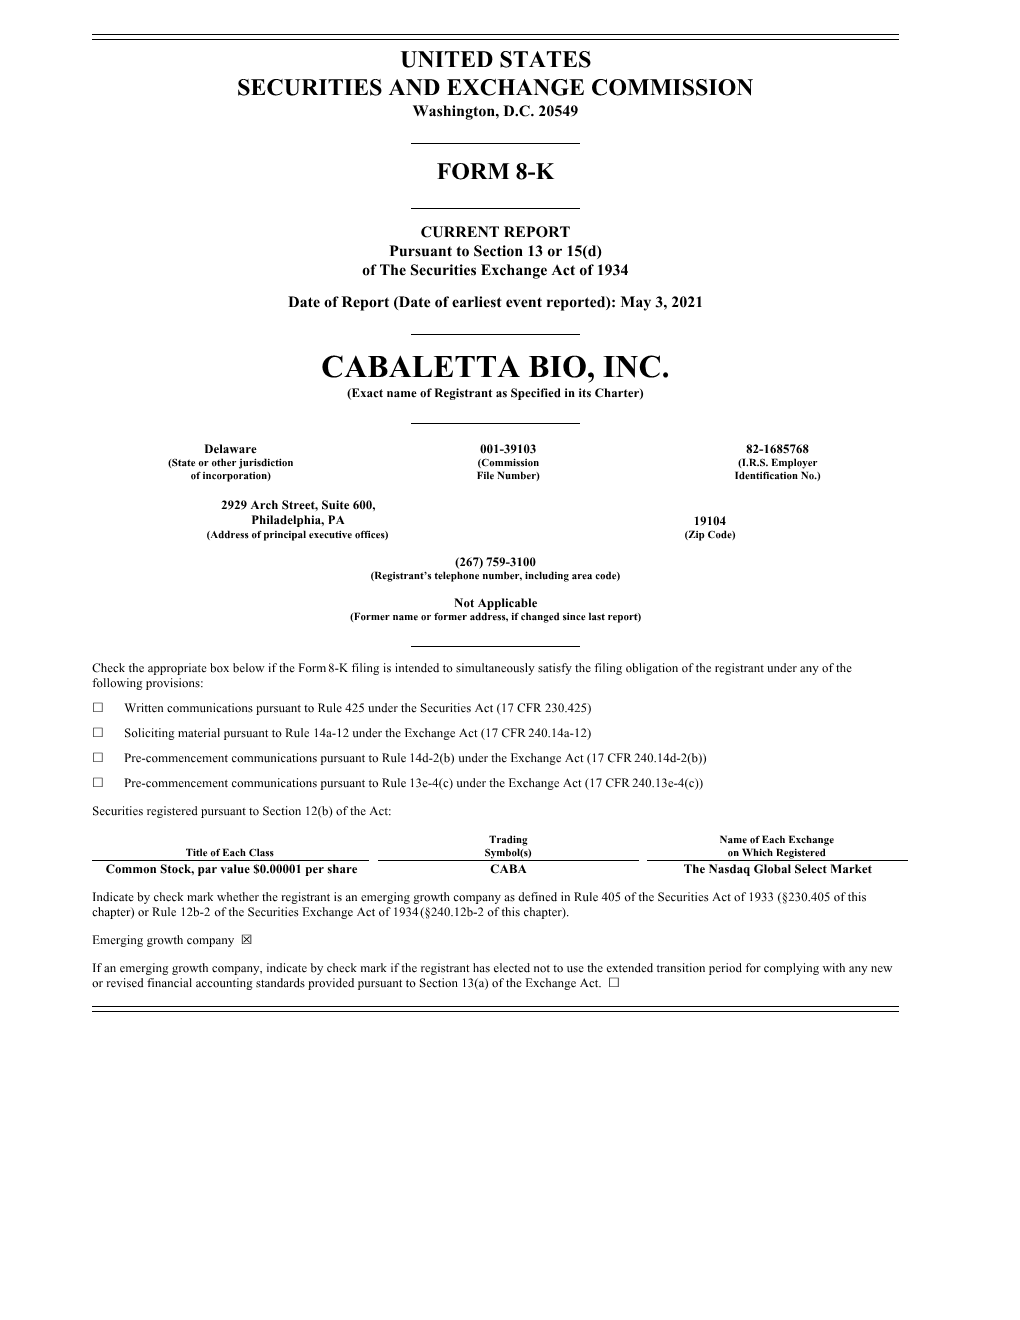 CABALETTA BIO, INC. (Exact Name of Registrant As Specified in Its Charter)